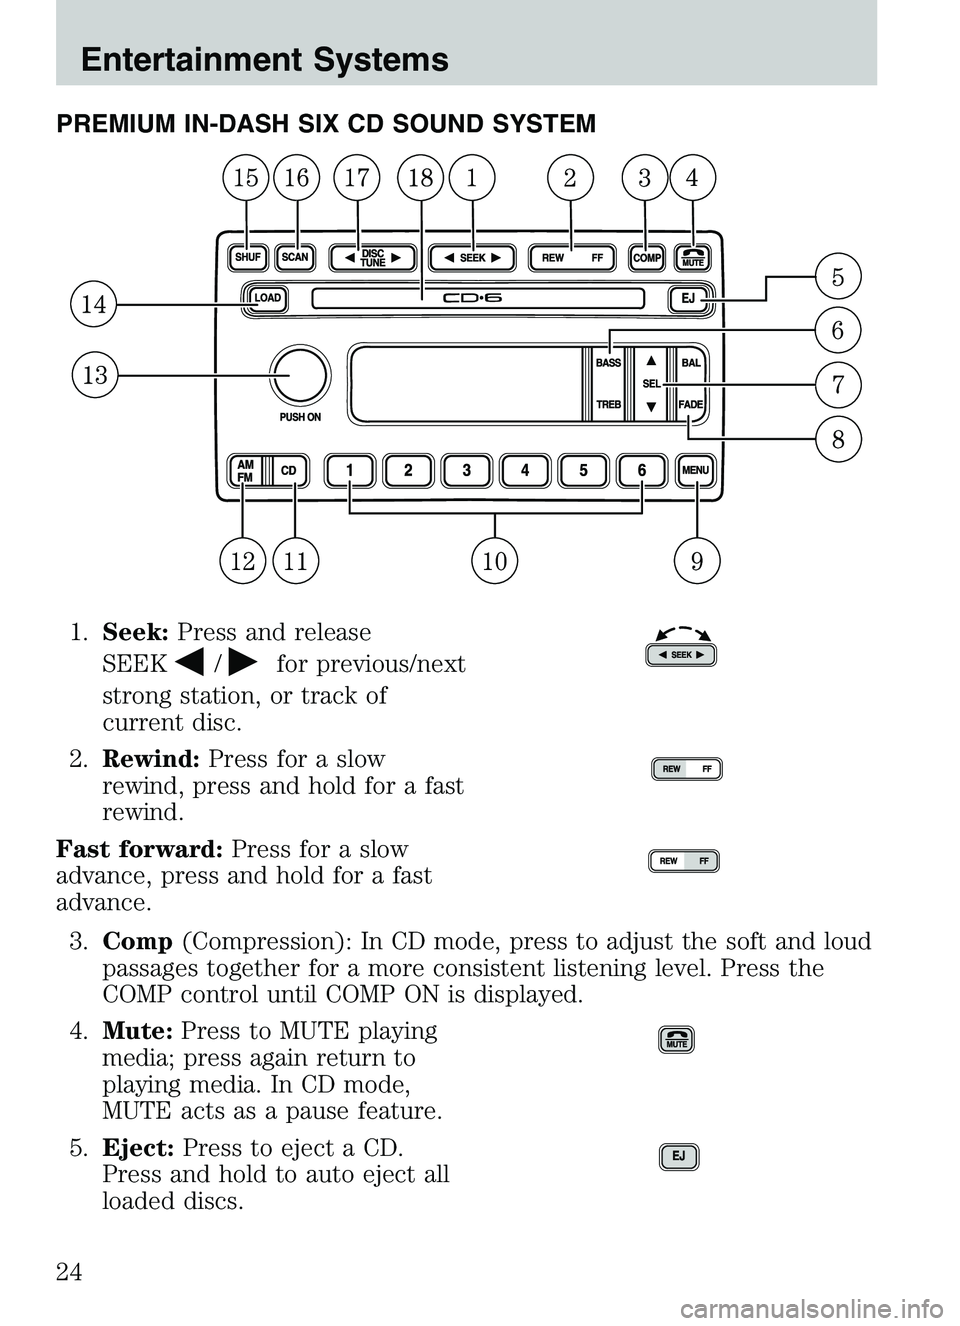 MAZDA MODEL B4000 4WD 2003 Owners Manual PREMIUM IN-DASH SIX CD SOUND SYSTEM1. Seek: Press and release
SEEK
/for previous/next
strong station, or track of
current disc.
2. Rewind: Press for a slow
rewind, press and hold for a fast
rewind.
Fa